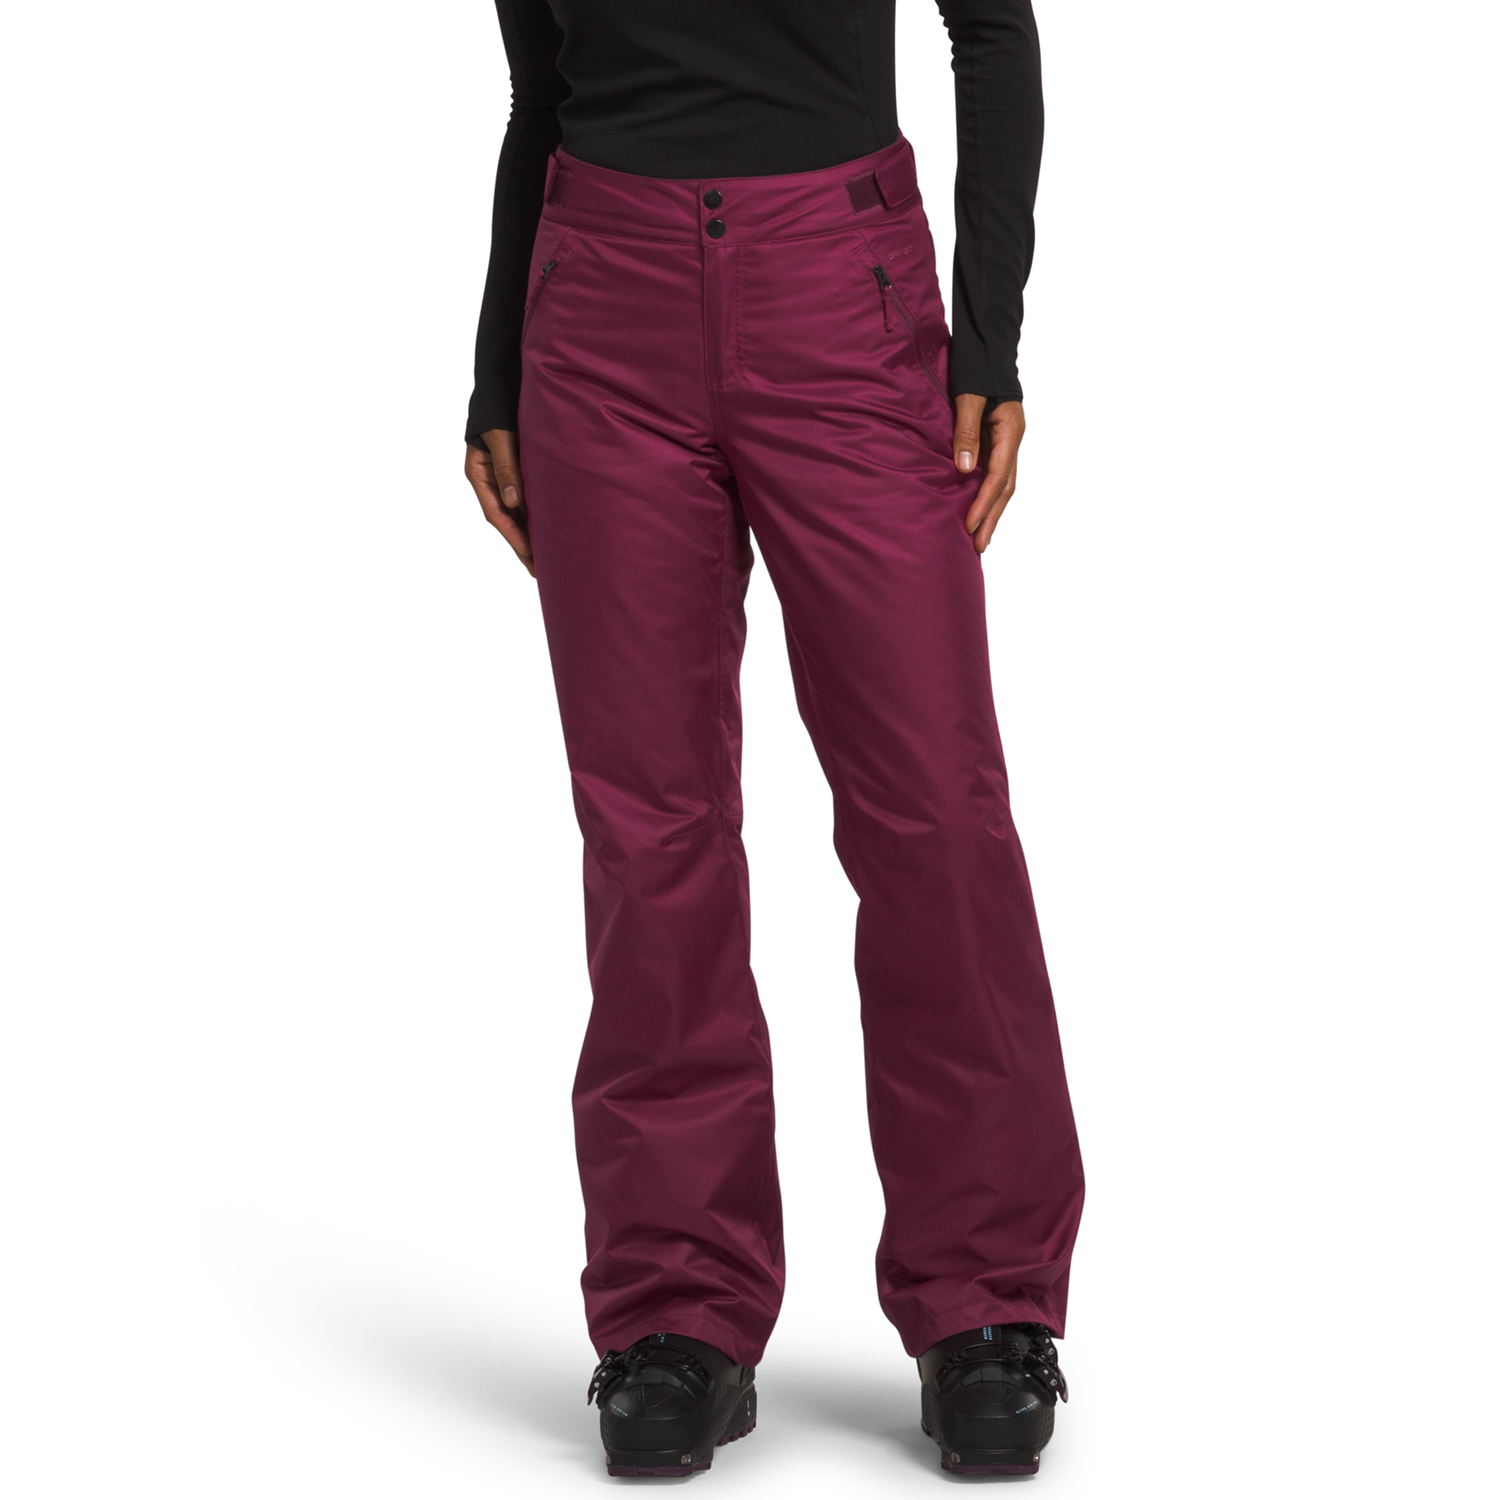  THE NORTH FACE Women's Sally Insulated Snow Pants, Gardenia  White 2, Medium Regular : Clothing, Shoes & Jewelry